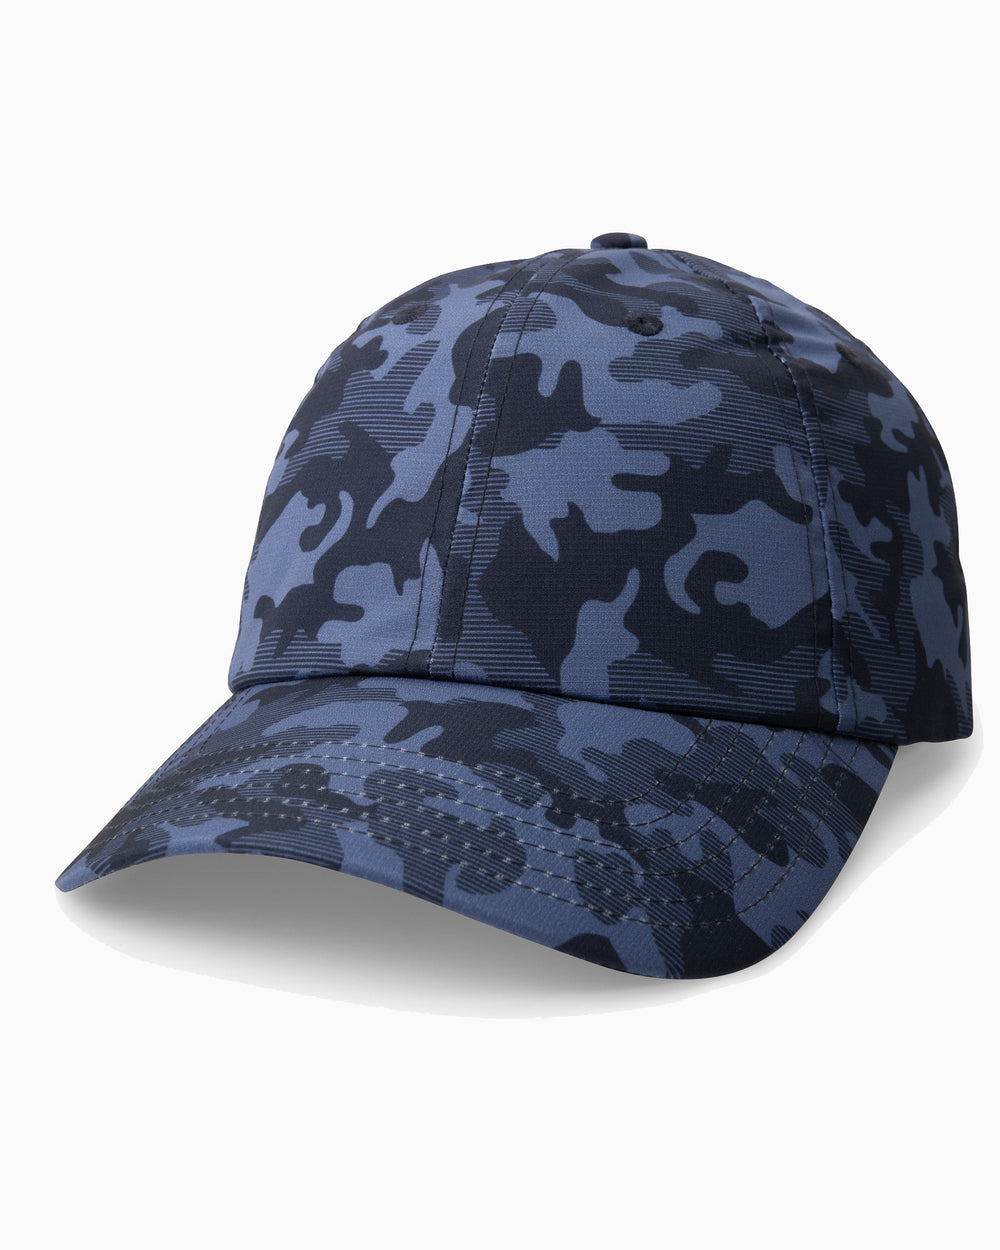 The front of the Camo Printed Performance Hat by Southern Tide - True Navy